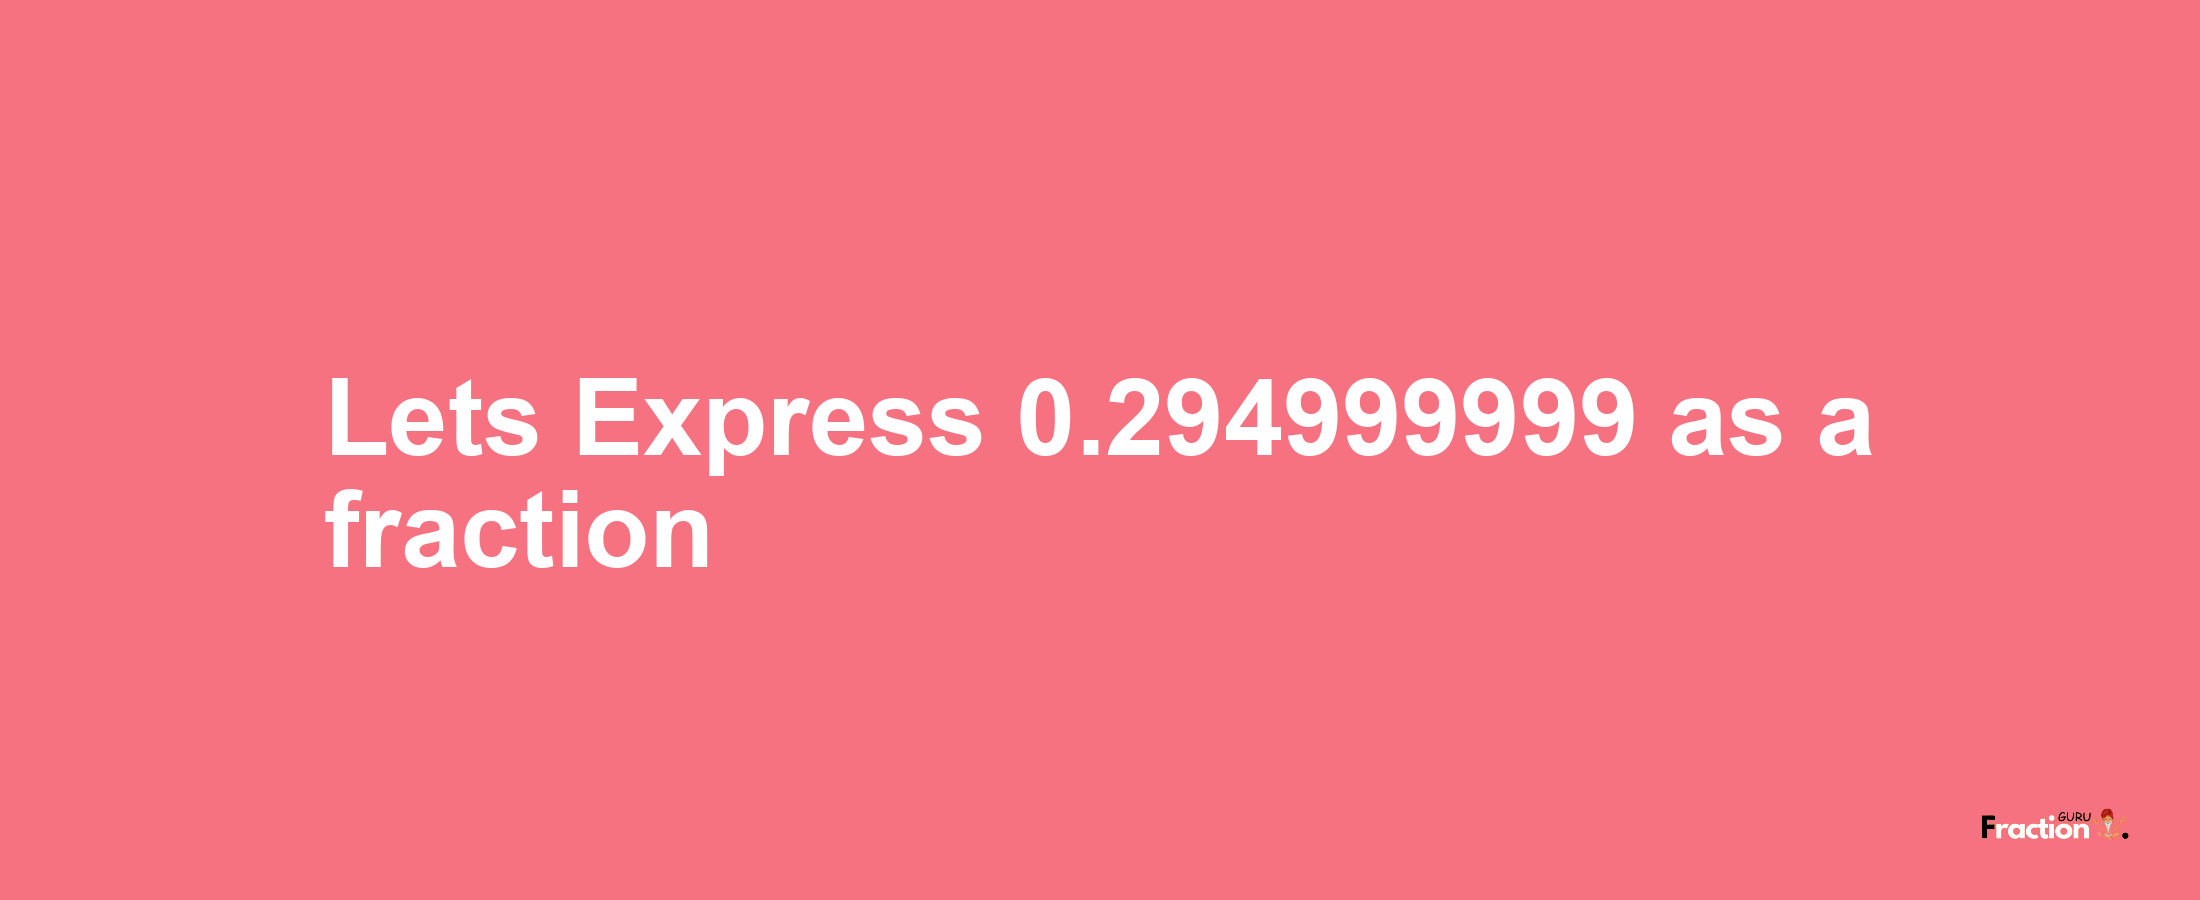 Lets Express 0.294999999 as afraction